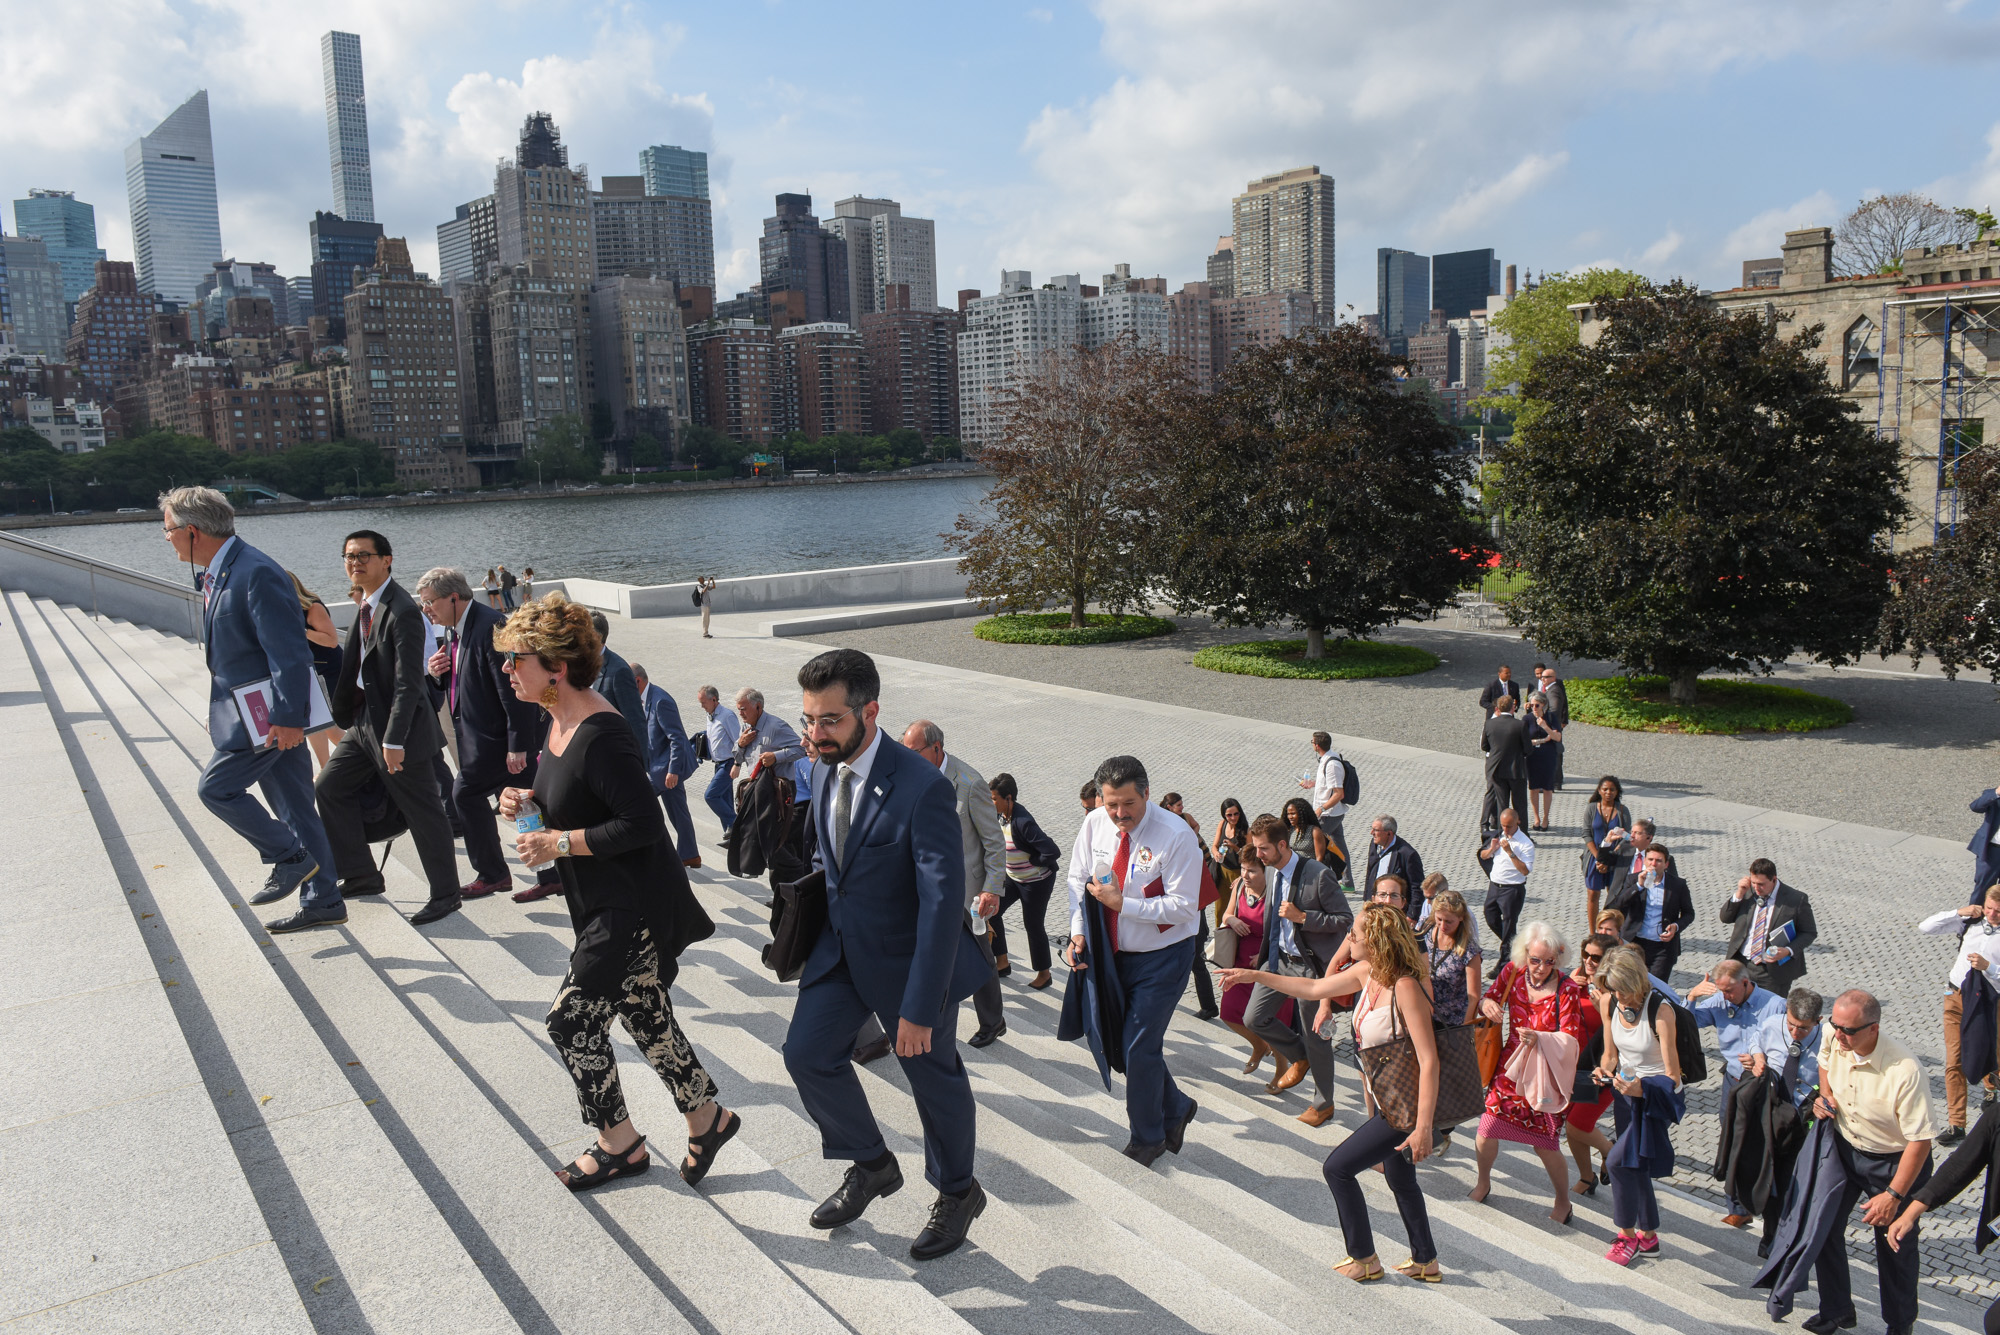 mayors walking up steps with the NY skyline in the background